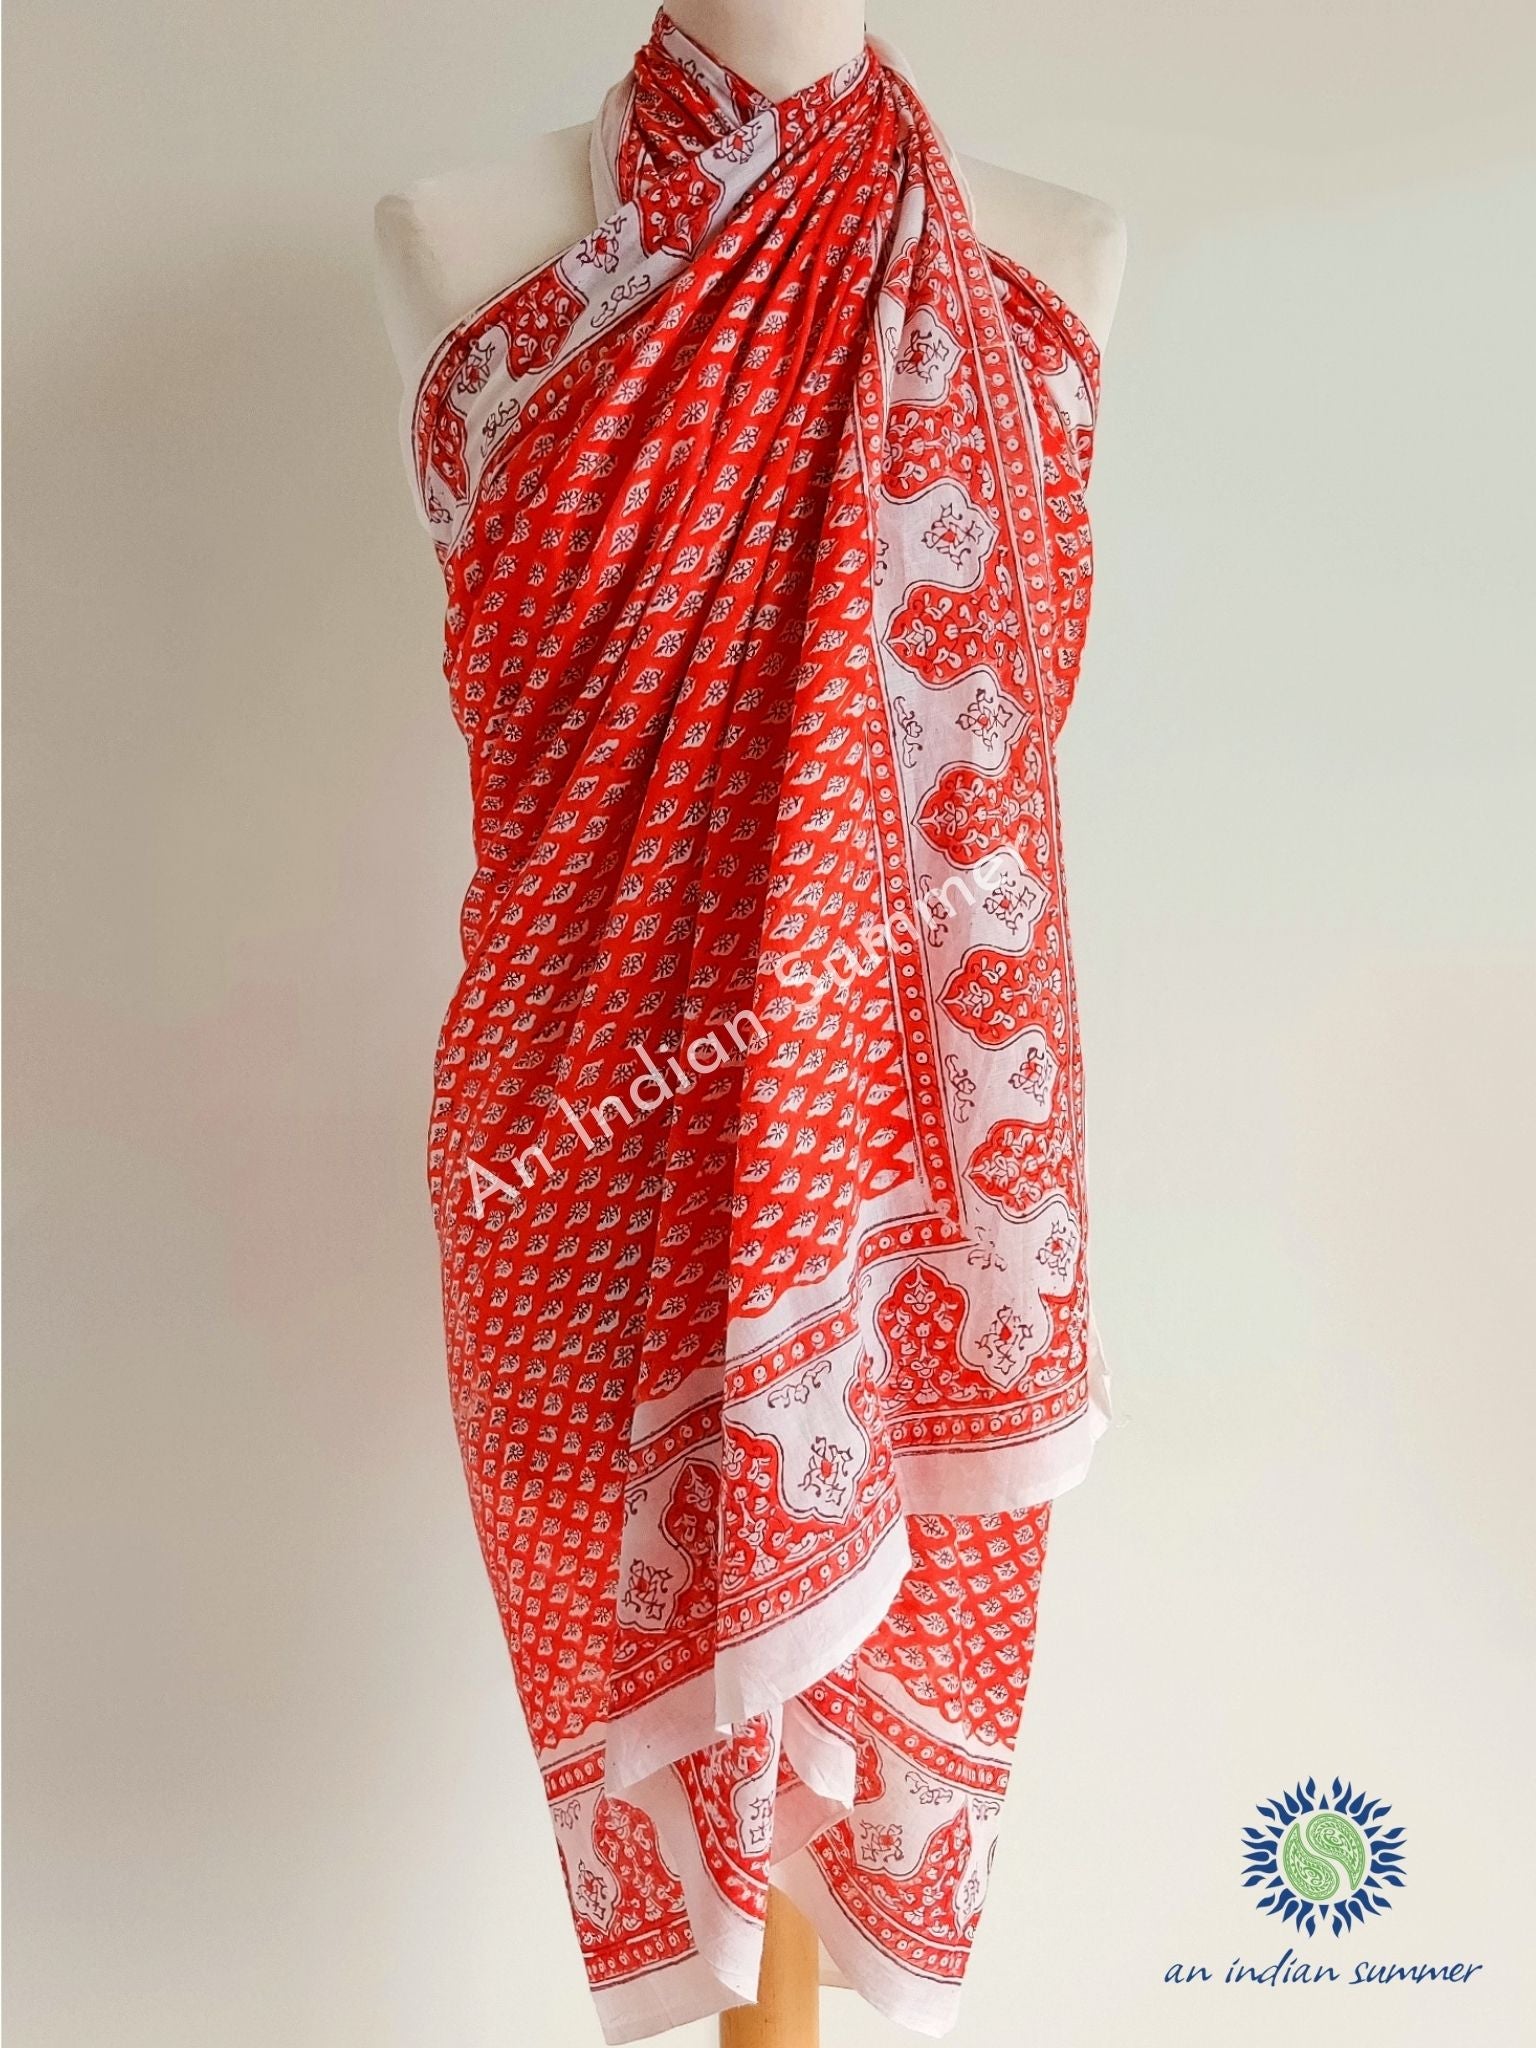 Sprig Sarong | Orange | Hand Block Printed | Cotton Voile | An Indian Summer | Seasonless Timeless Sustainable Ethical Authentic Artisan Conscious Clothing Lifestyle Brand